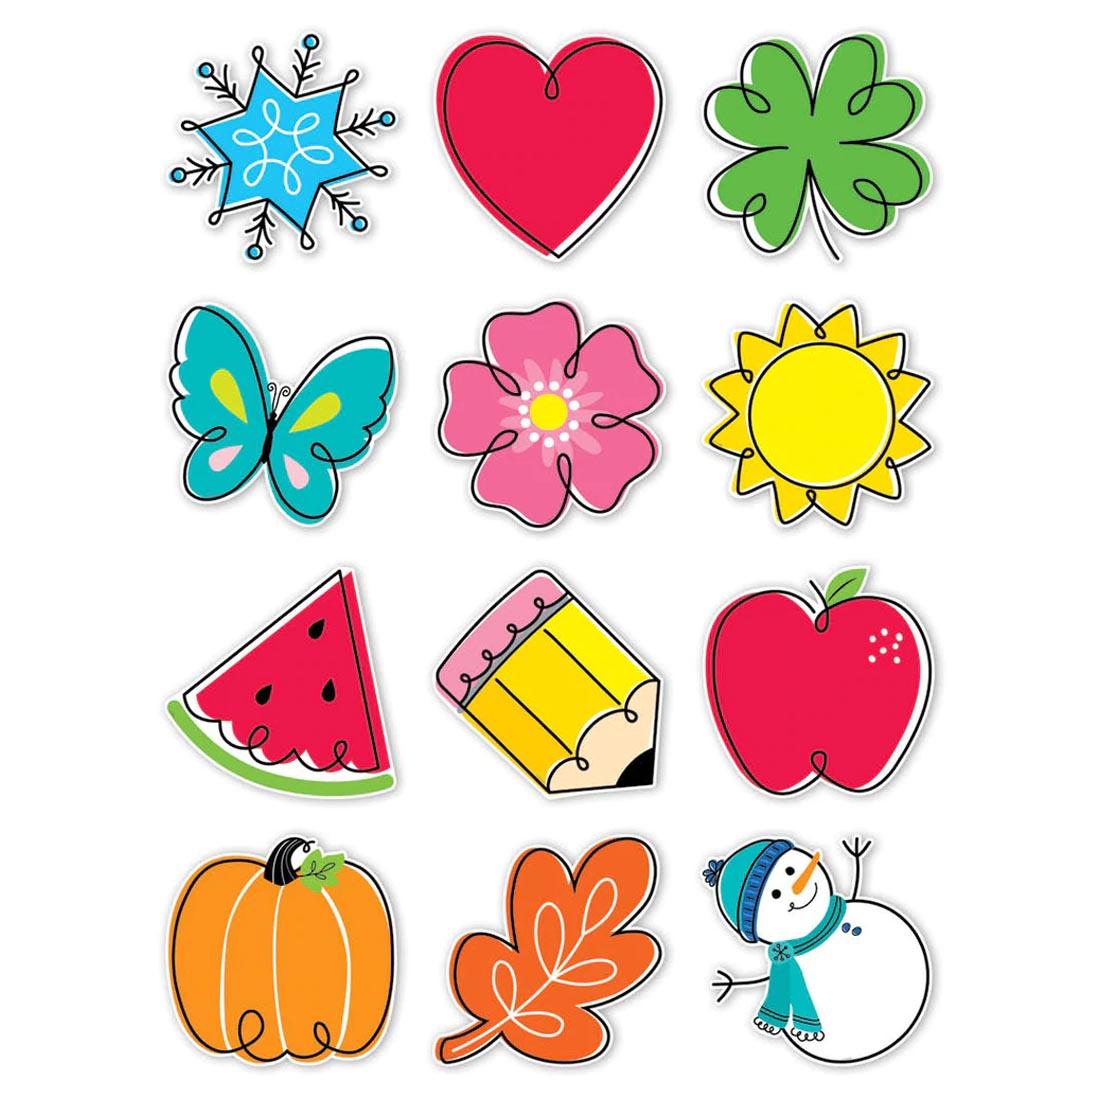 Seasonal Accents 10" Designer Cut-Outs By Creative Teaching Press showing 12 designs